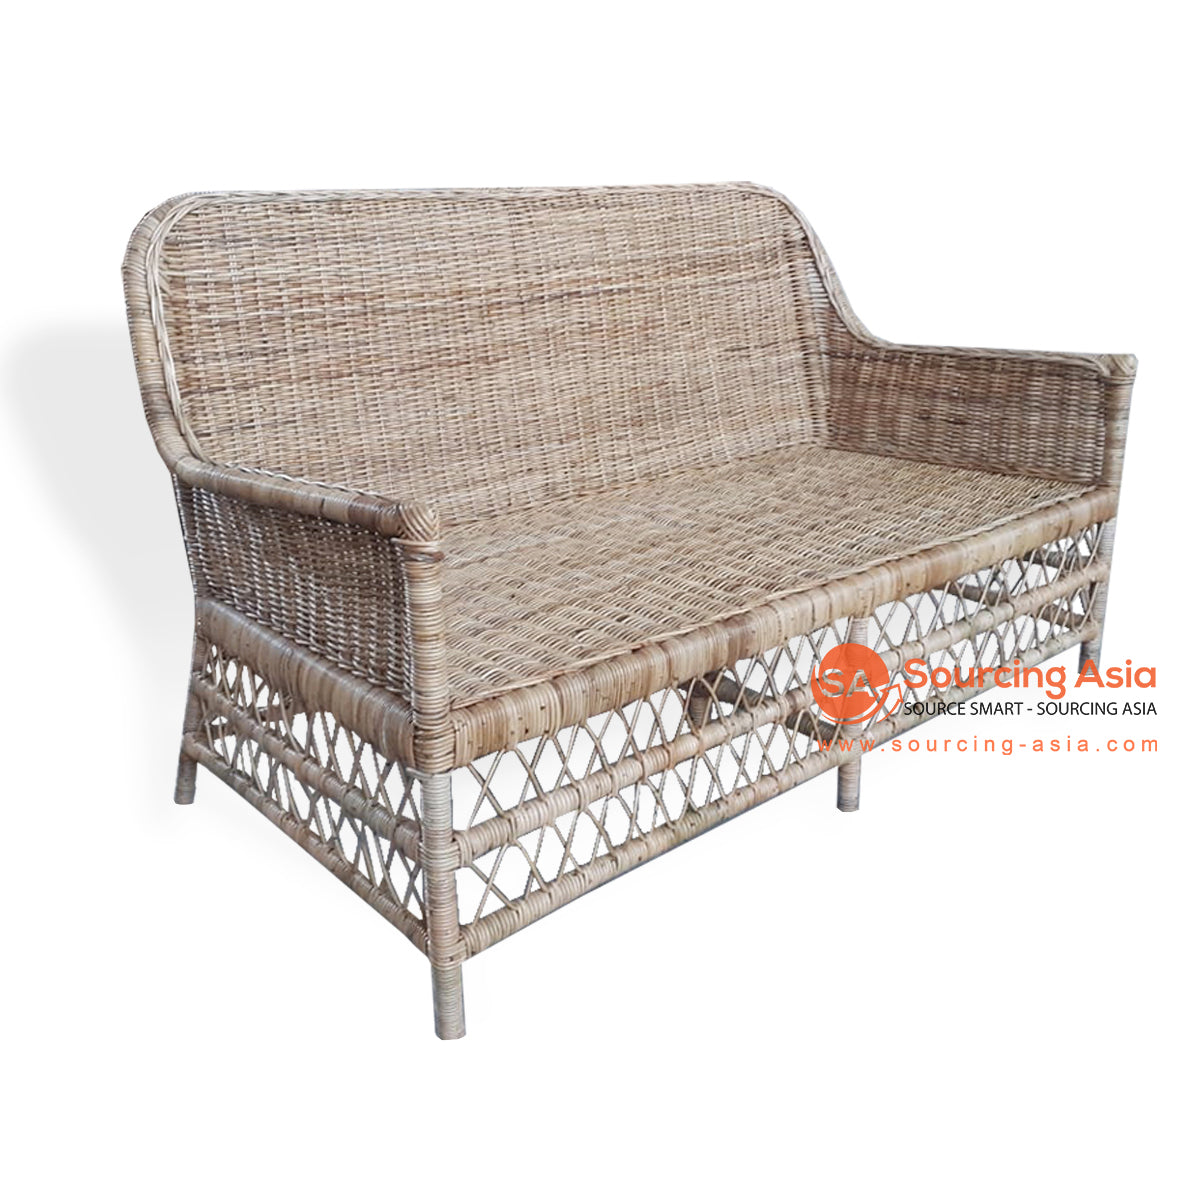 BNT241 NATURAL RATTAN TIGHT WEAVE TWO SEATS CANE SOFA (PRICE WITHOUT CUSHION)